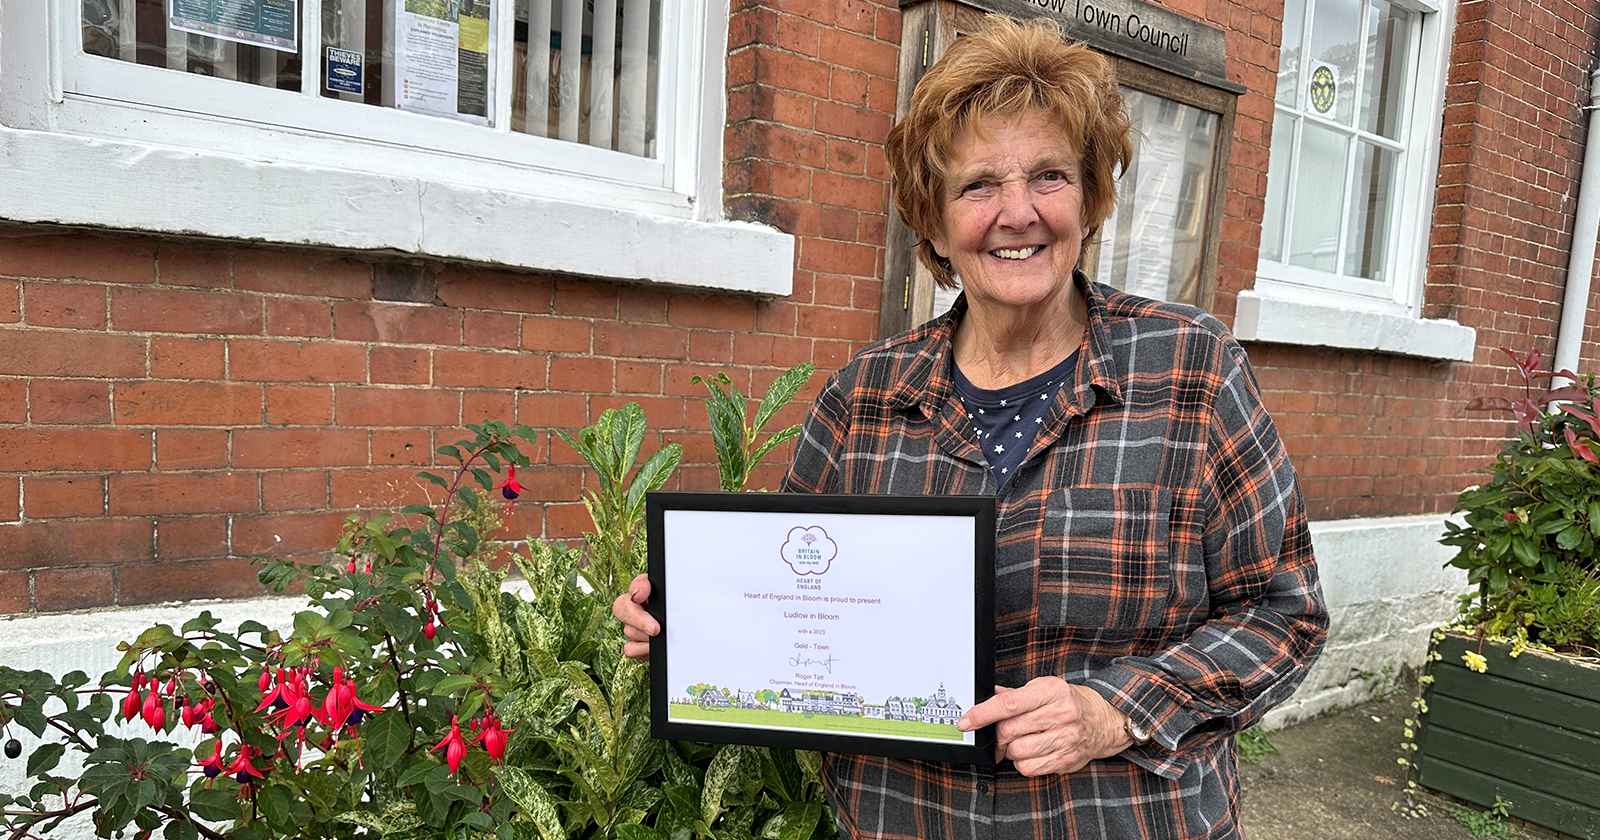 Cllr Viv Parry with the Ludlow in Bloom award